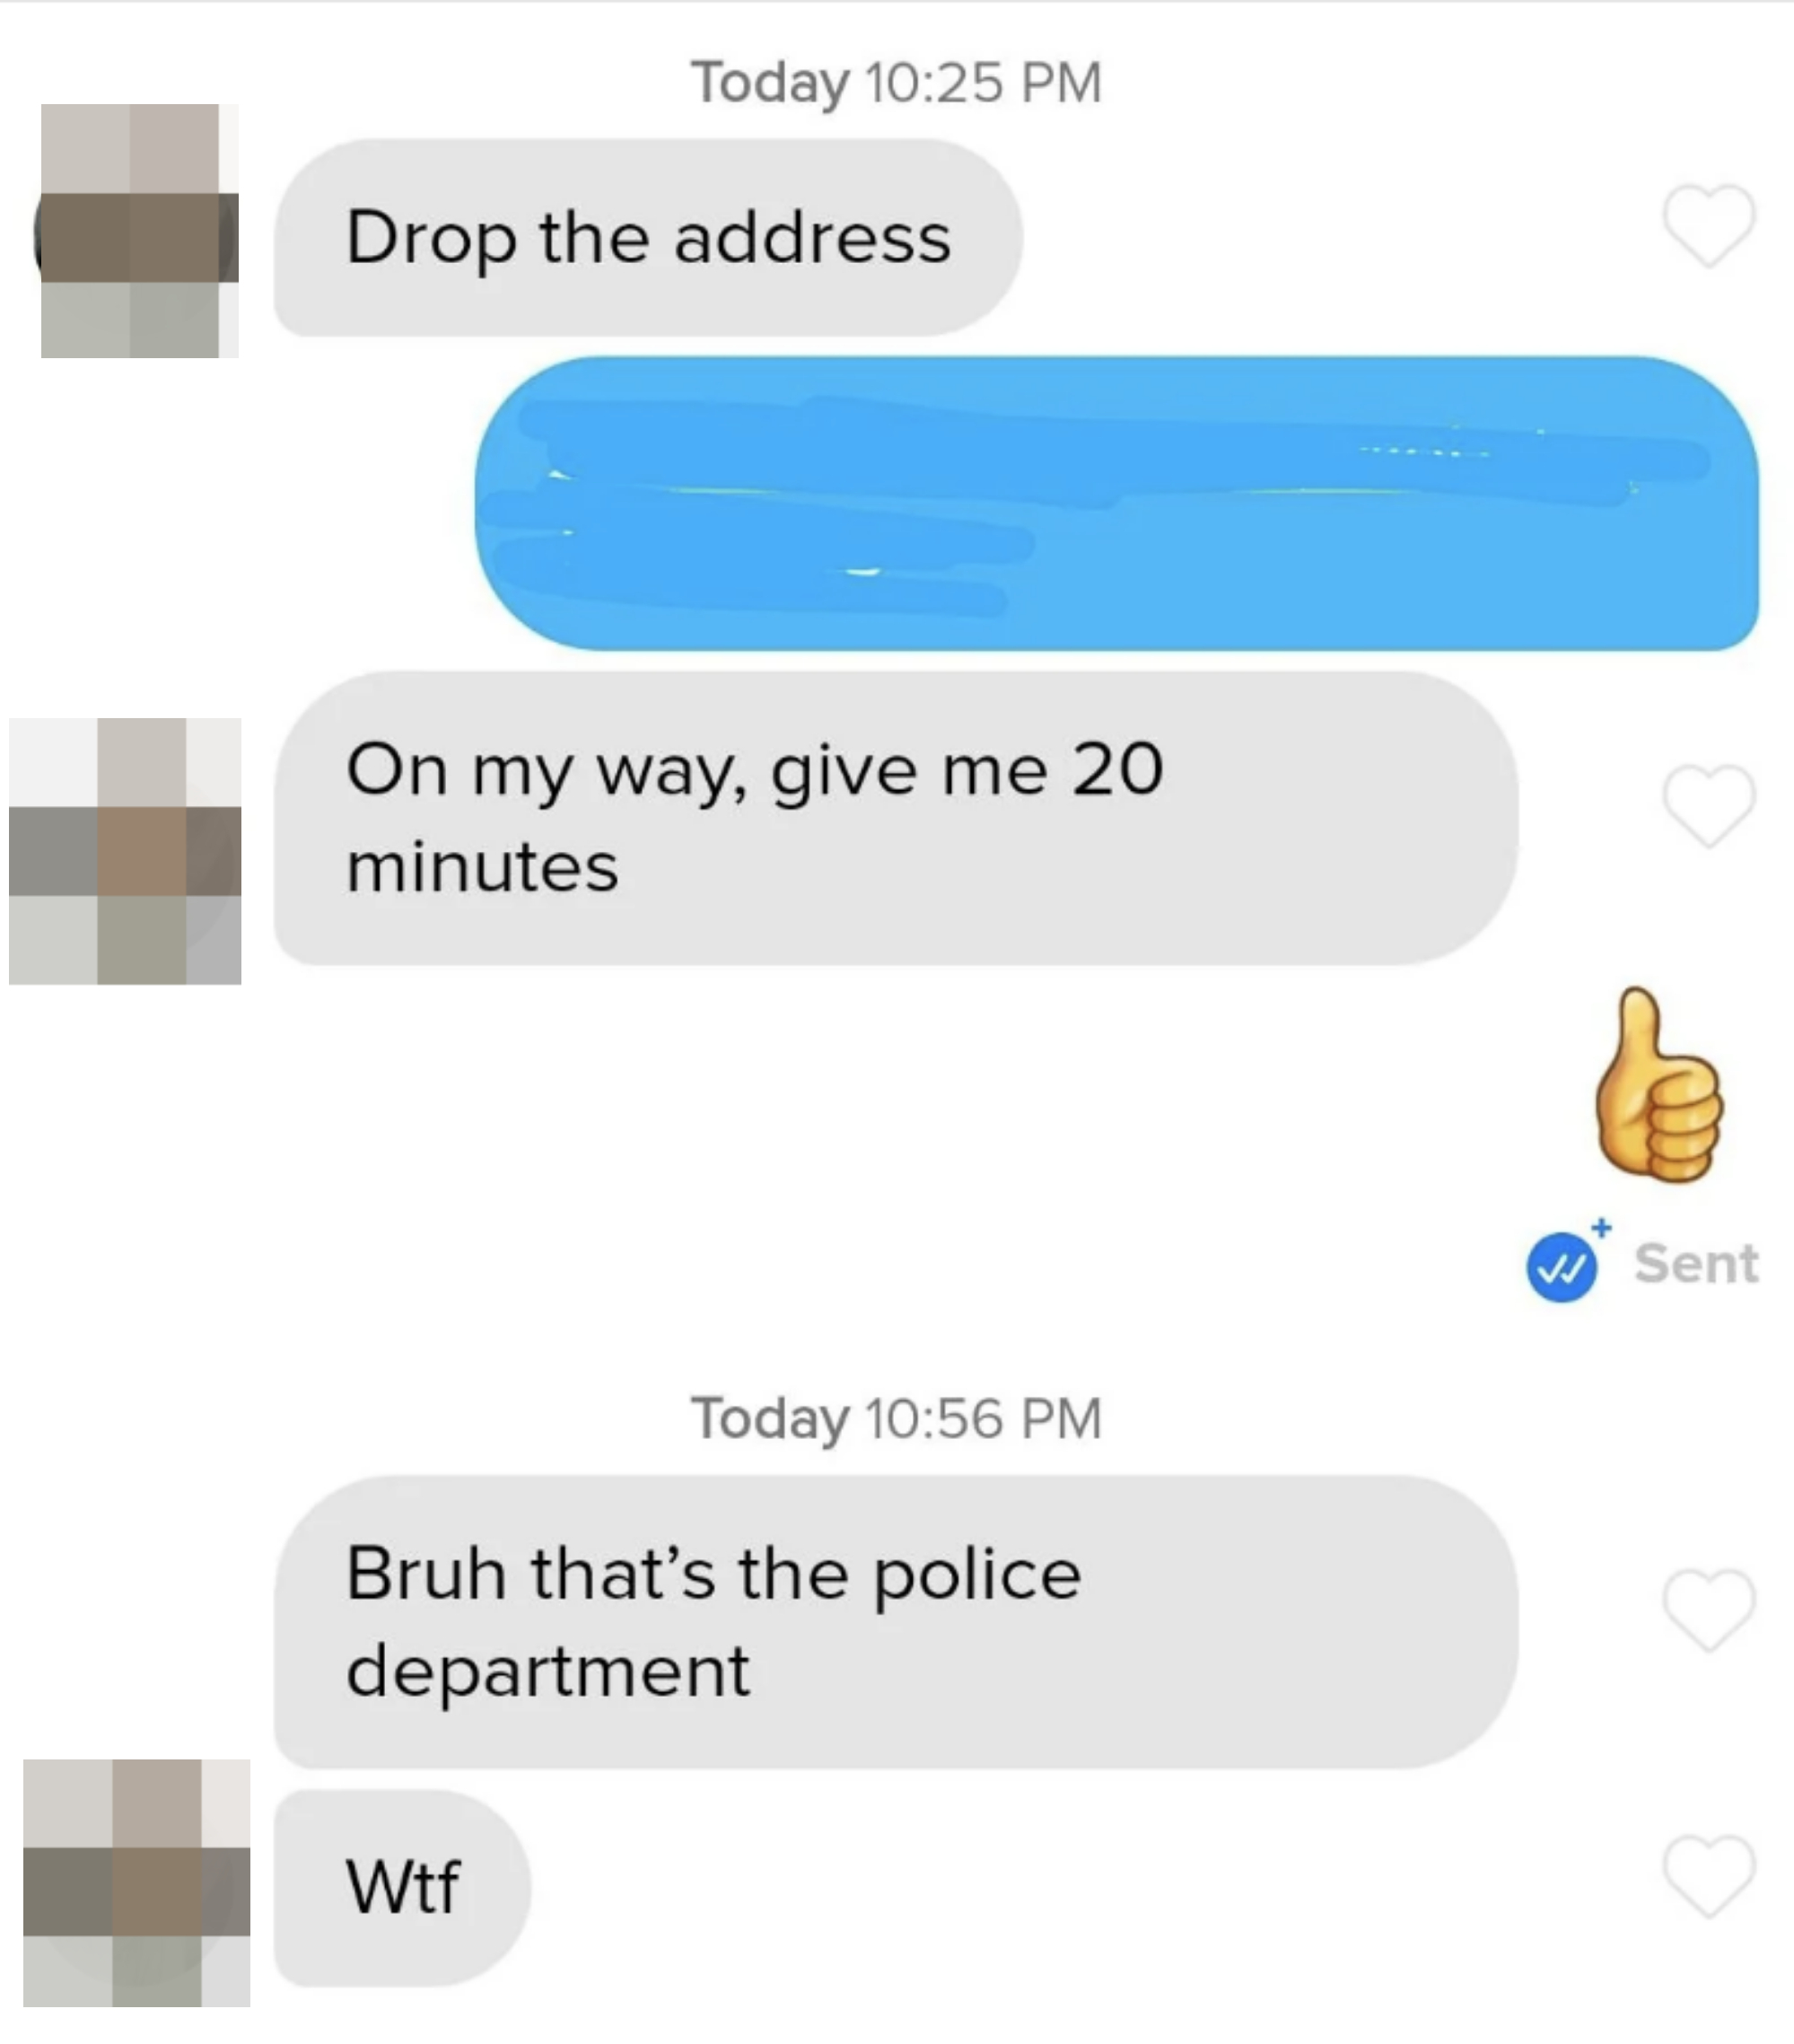 someone gives the other person the address to the police department as their own